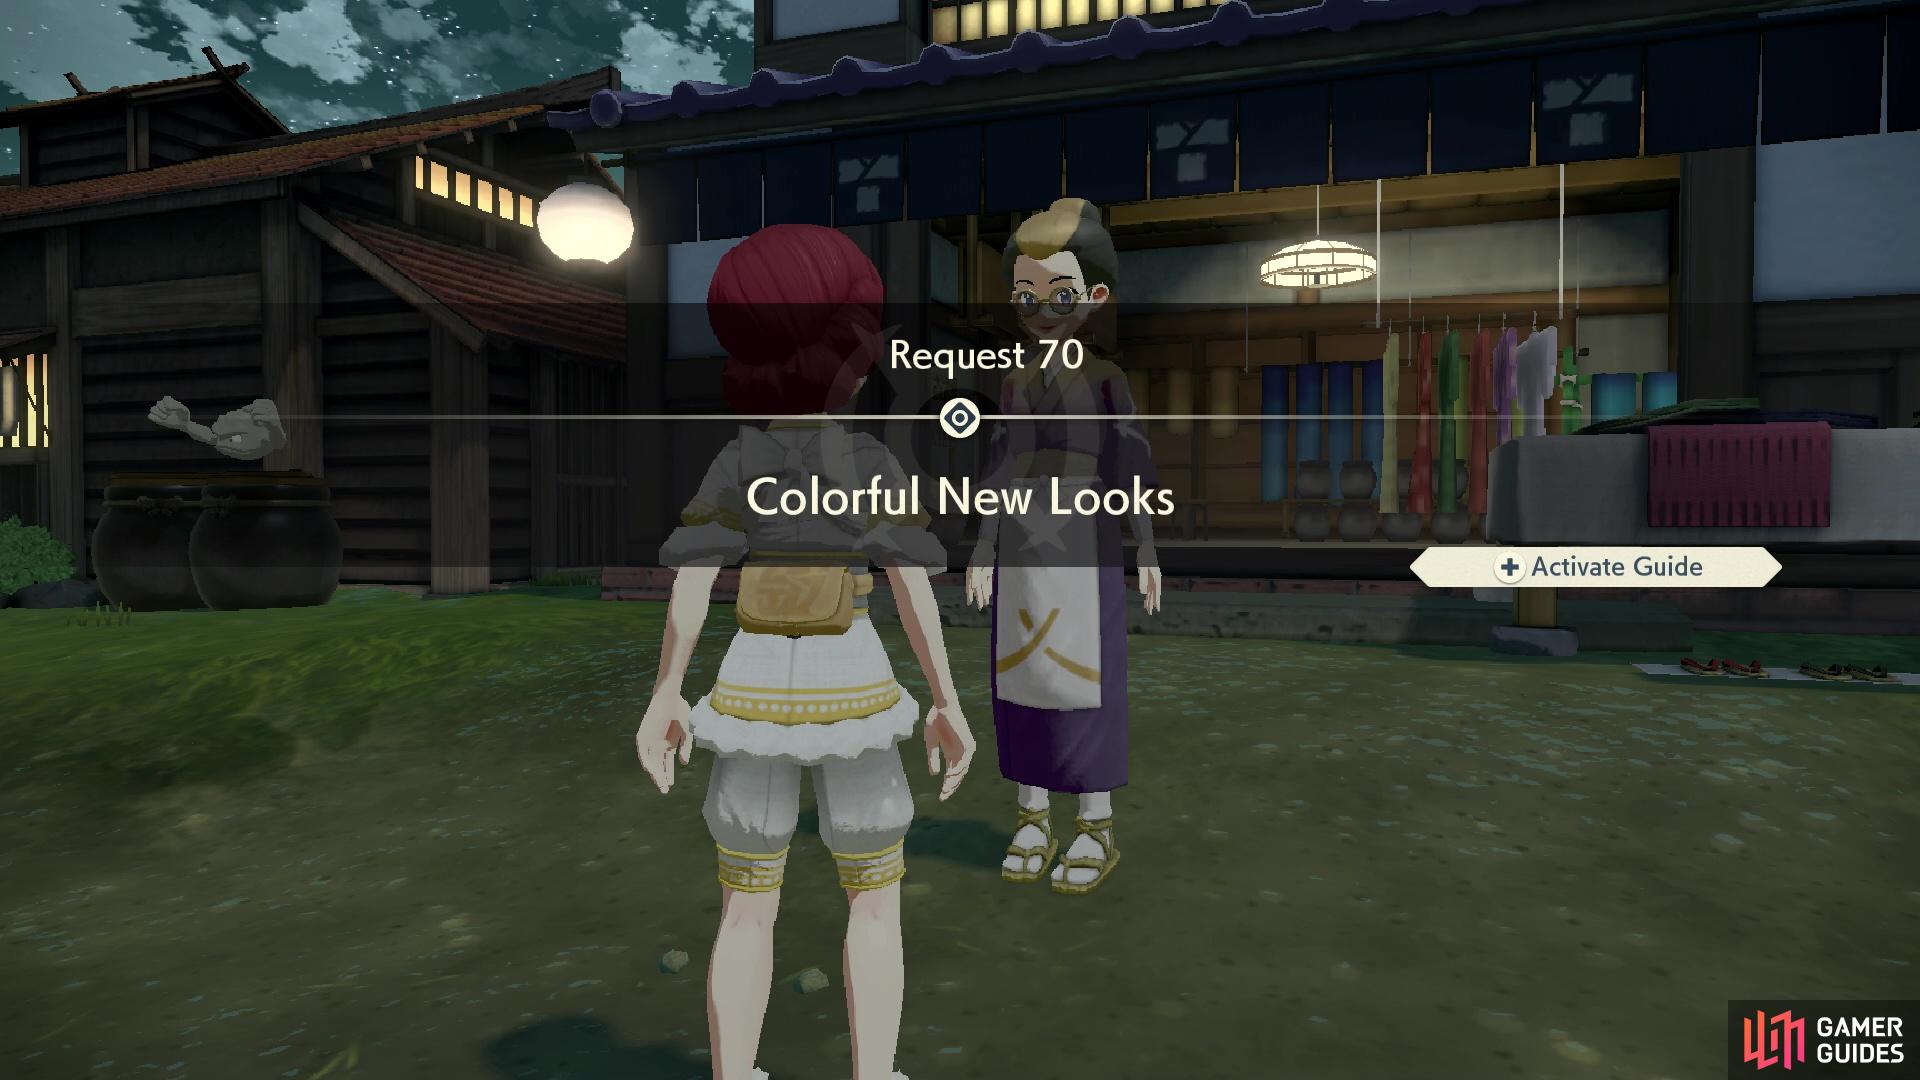 Request 70: Colorful New Looks.